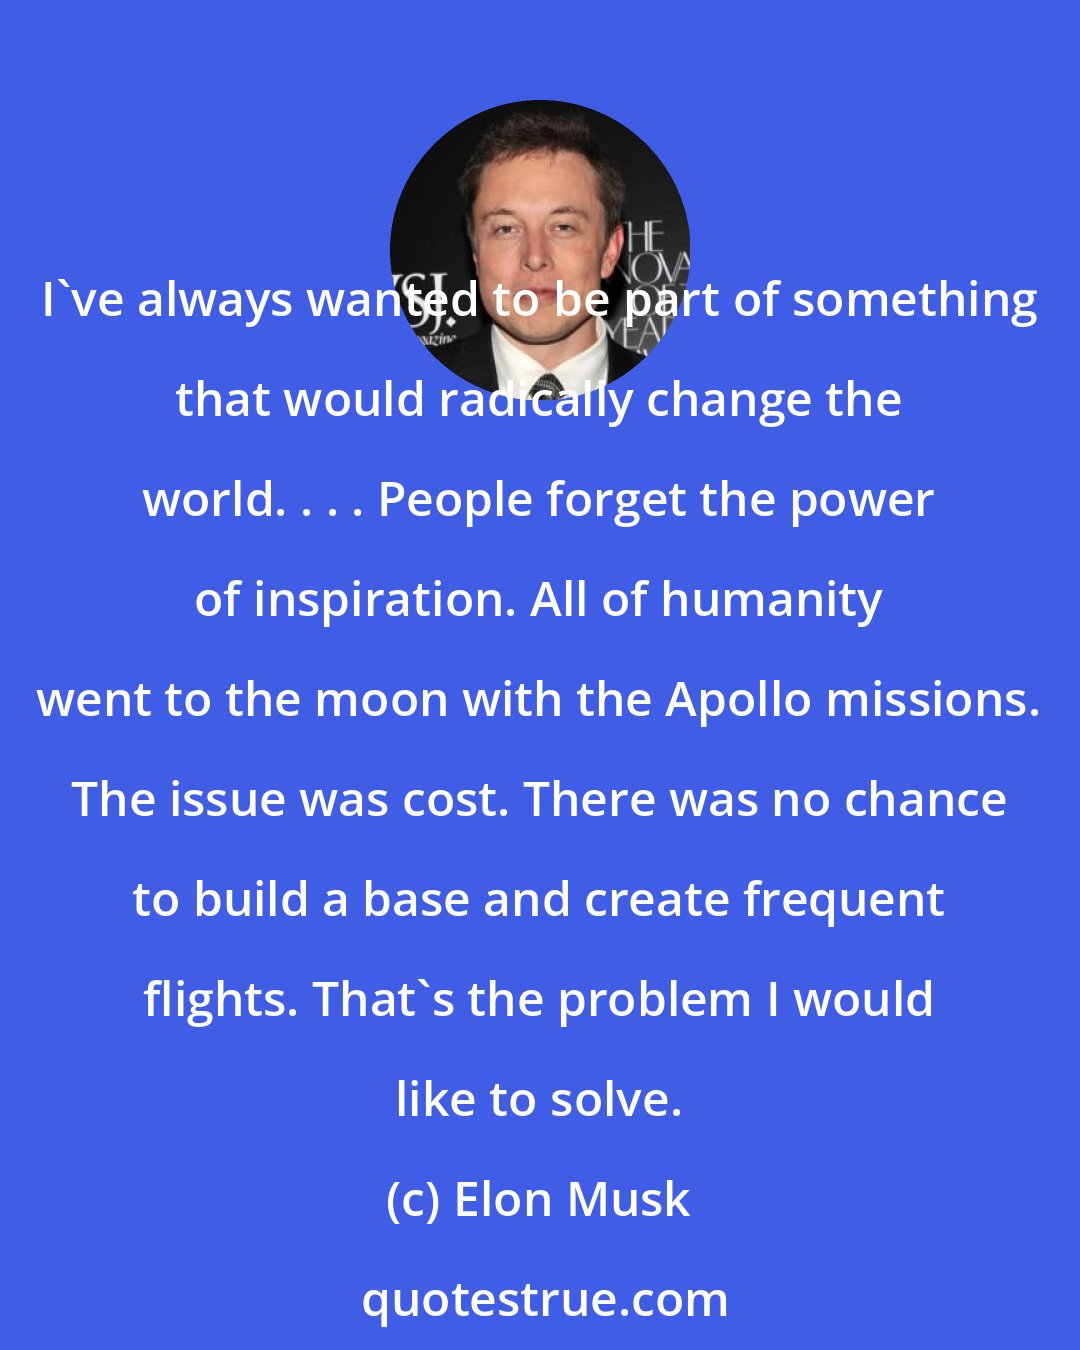 Elon Musk: I've always wanted to be part of something that would radically change the world. . . . People forget the power of inspiration. All of humanity went to the moon with the Apollo missions. The issue was cost. There was no chance to build a base and create frequent flights. That's the problem I would like to solve.